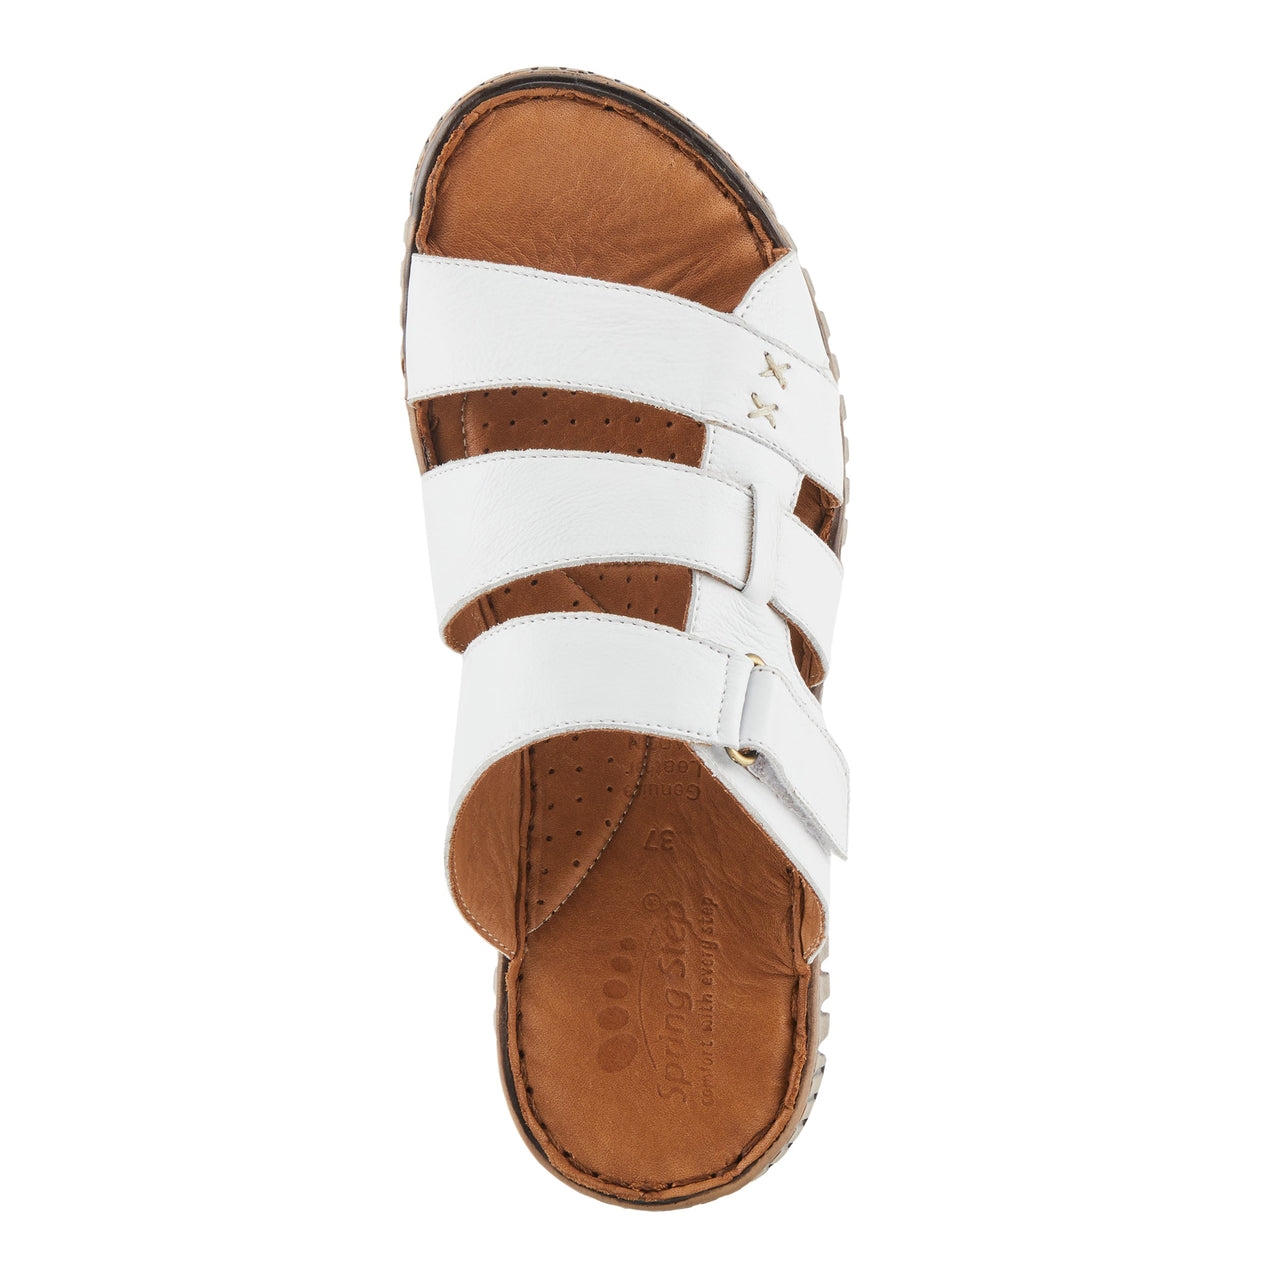 Stylish and comfortable Spring Step Olly Sandals with adjustable straps and cushioned footbed